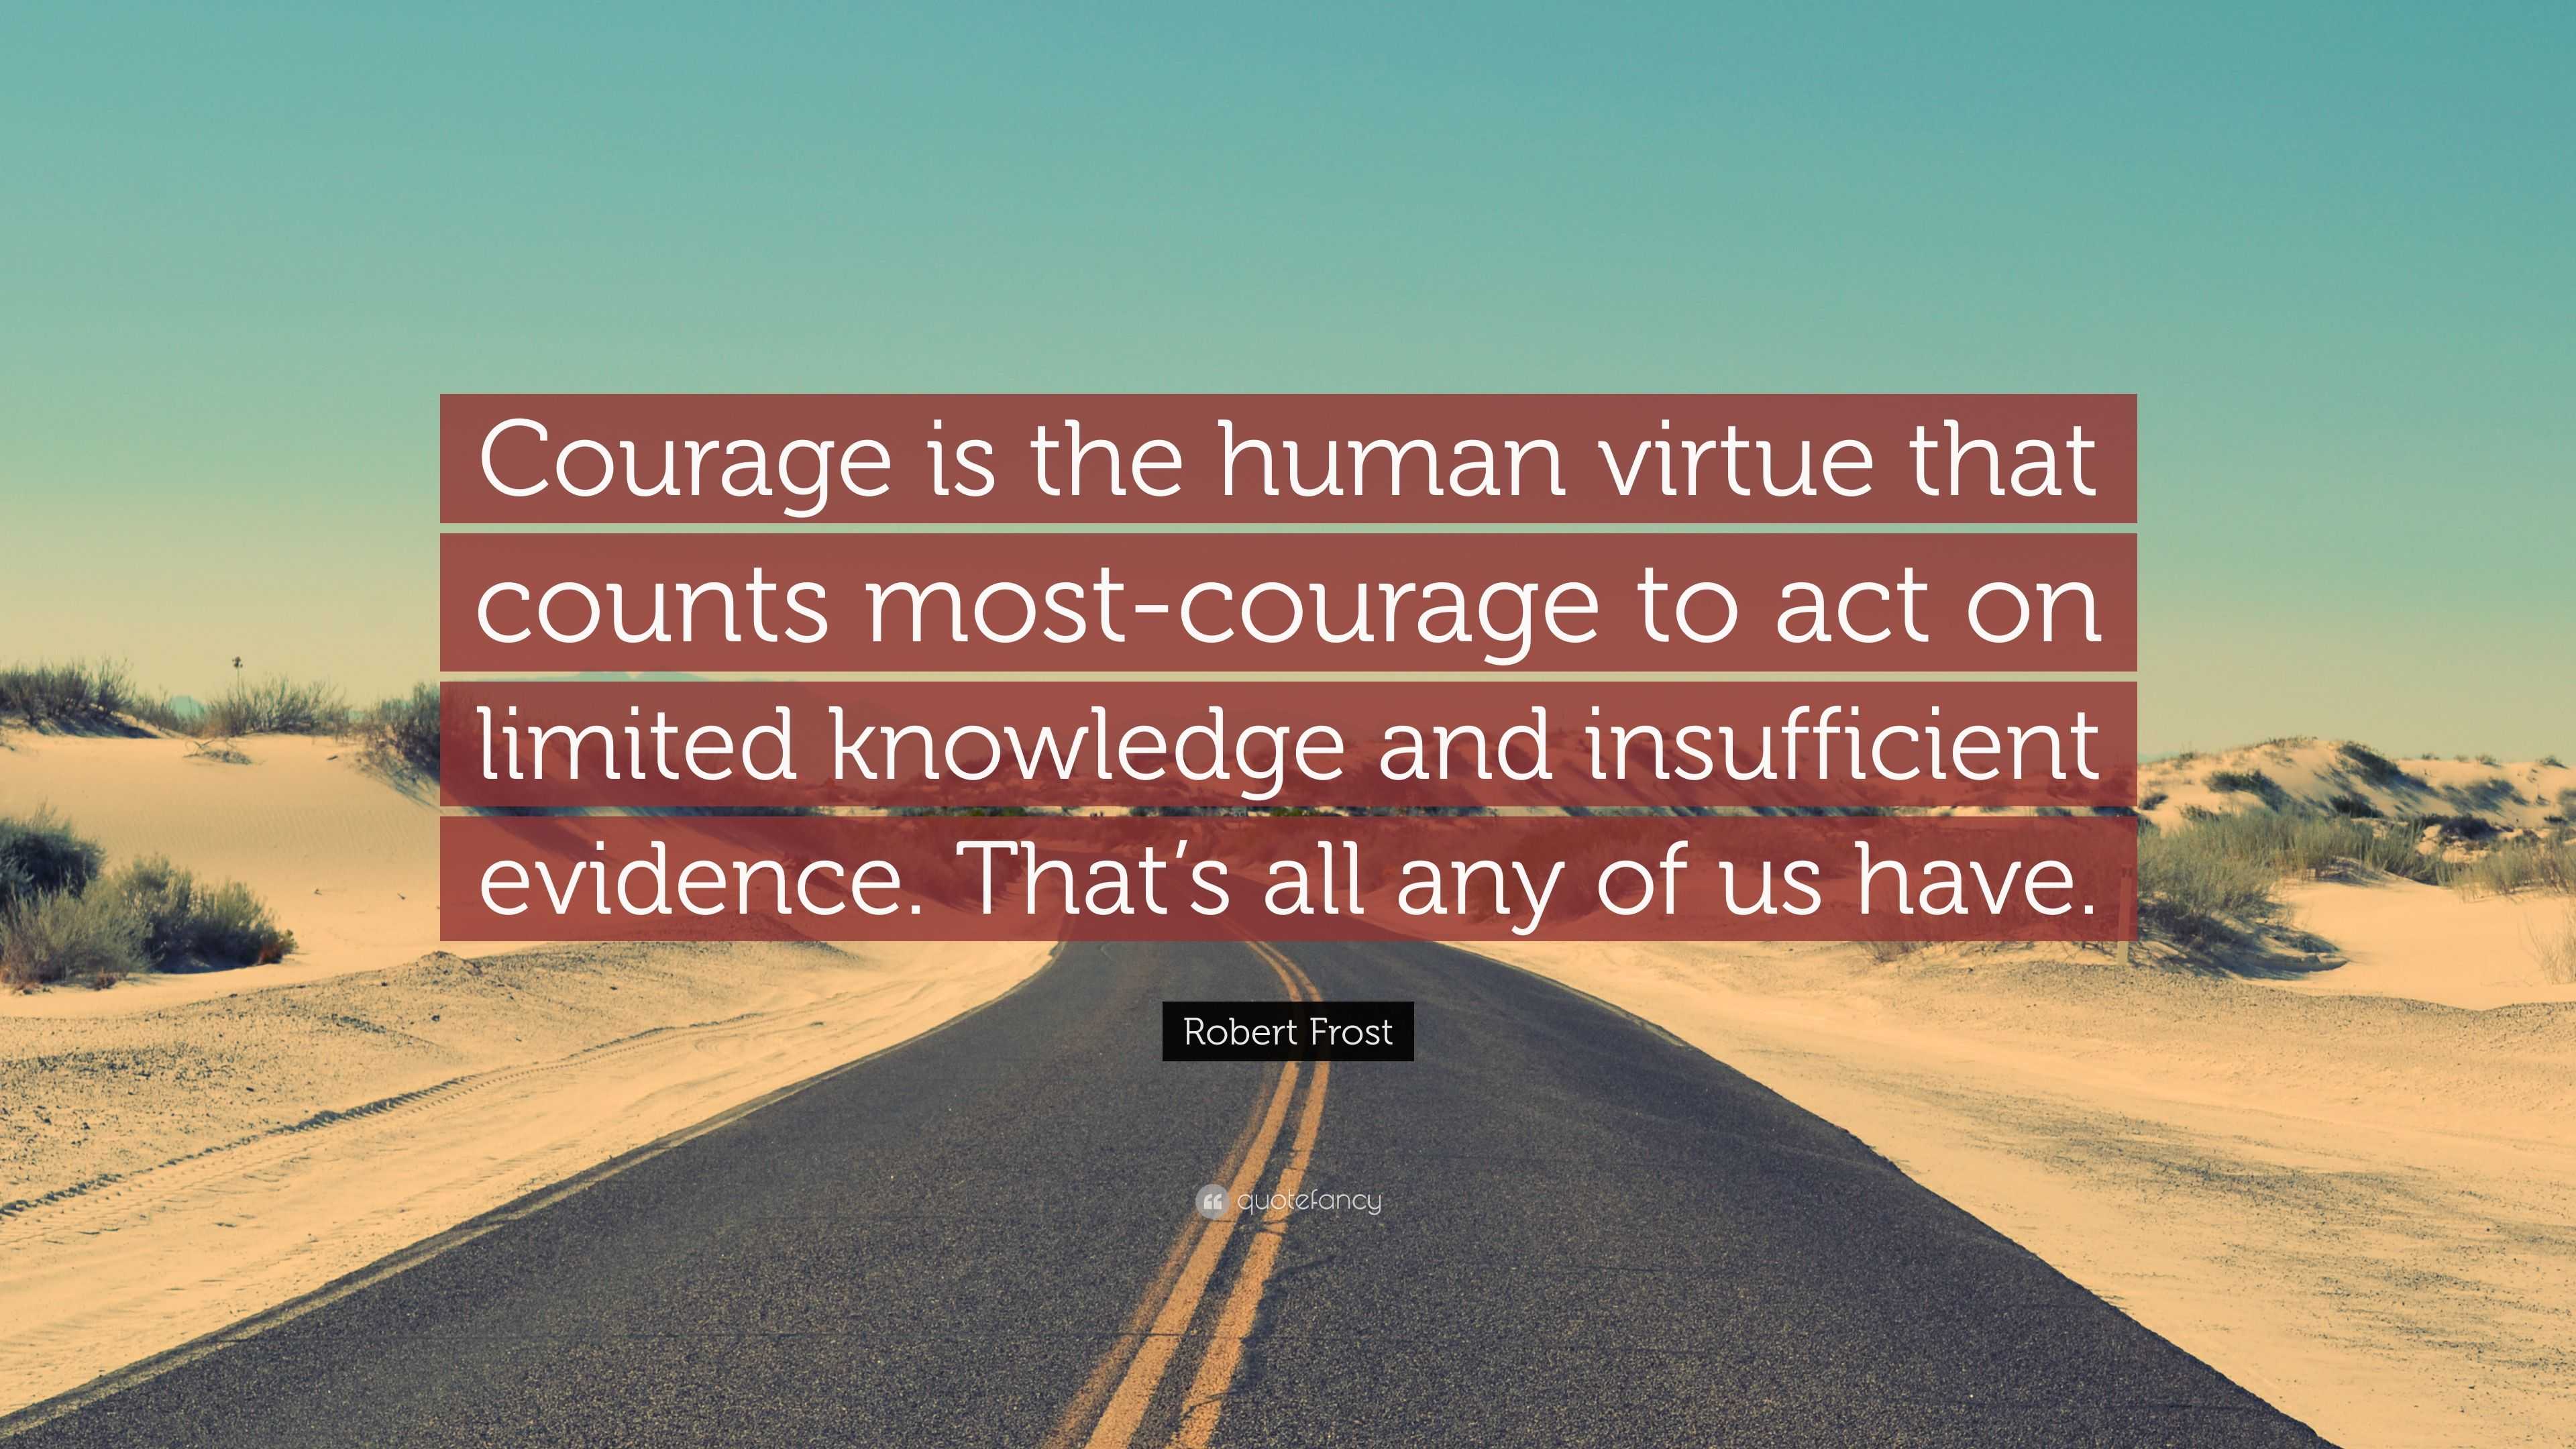 Robert Frost Quote: “Courage is the human virtue that counts most ...